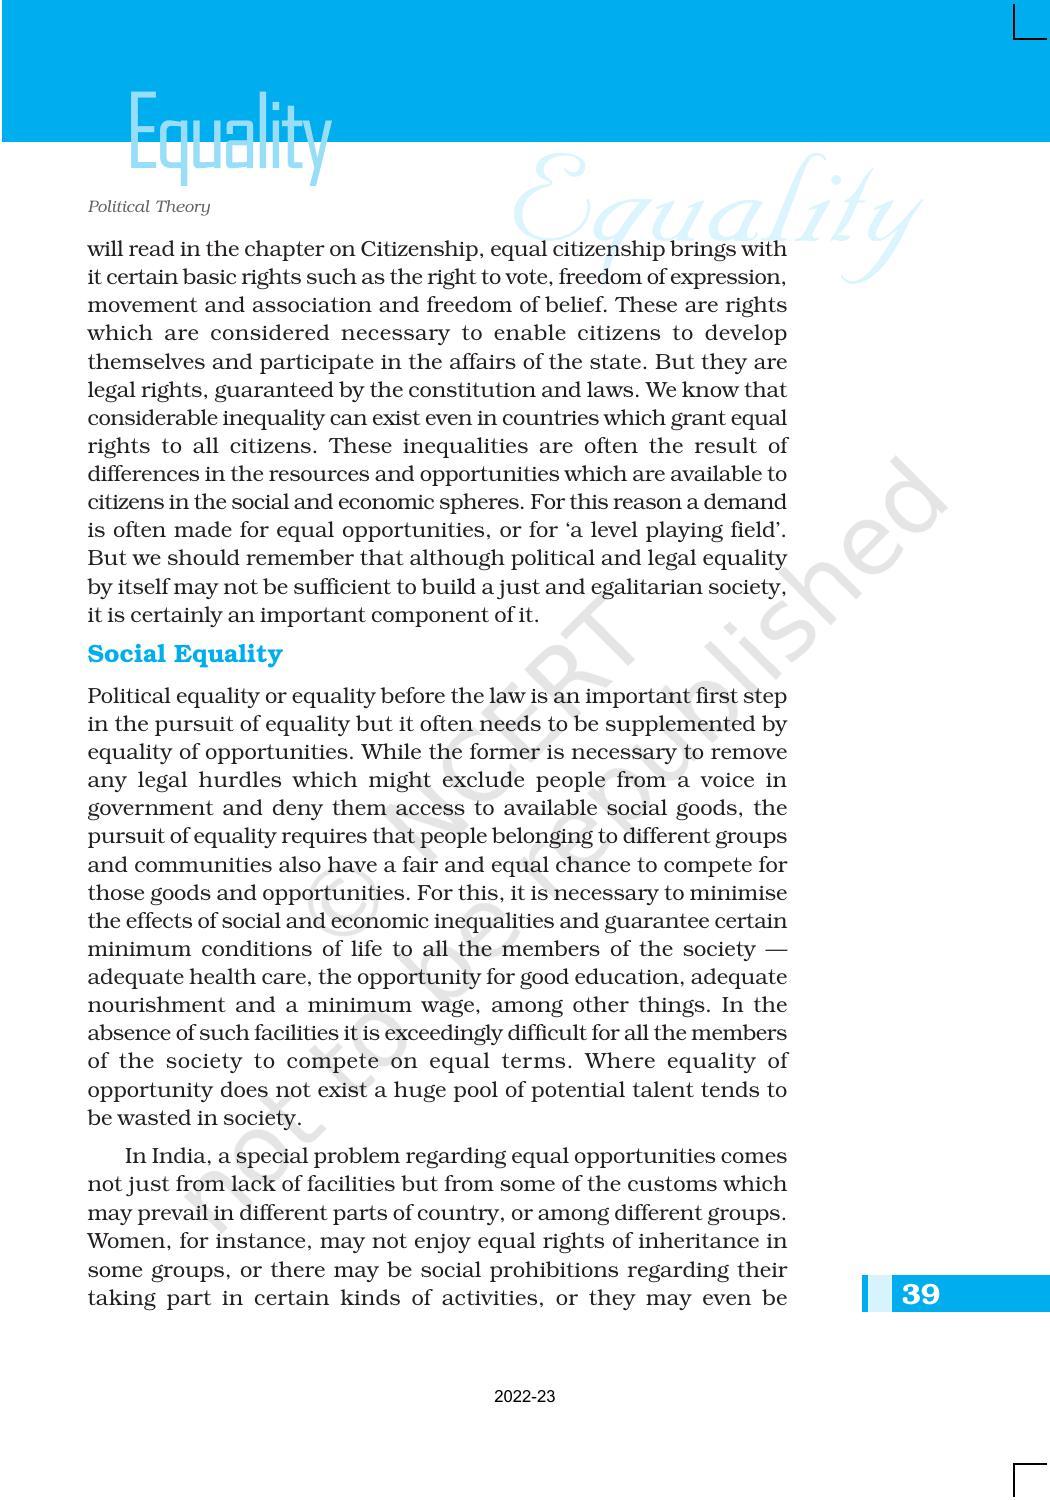 NCERT Book for Class 11 Political Science (Political Theory) Chapter 3 Equality - Page 9